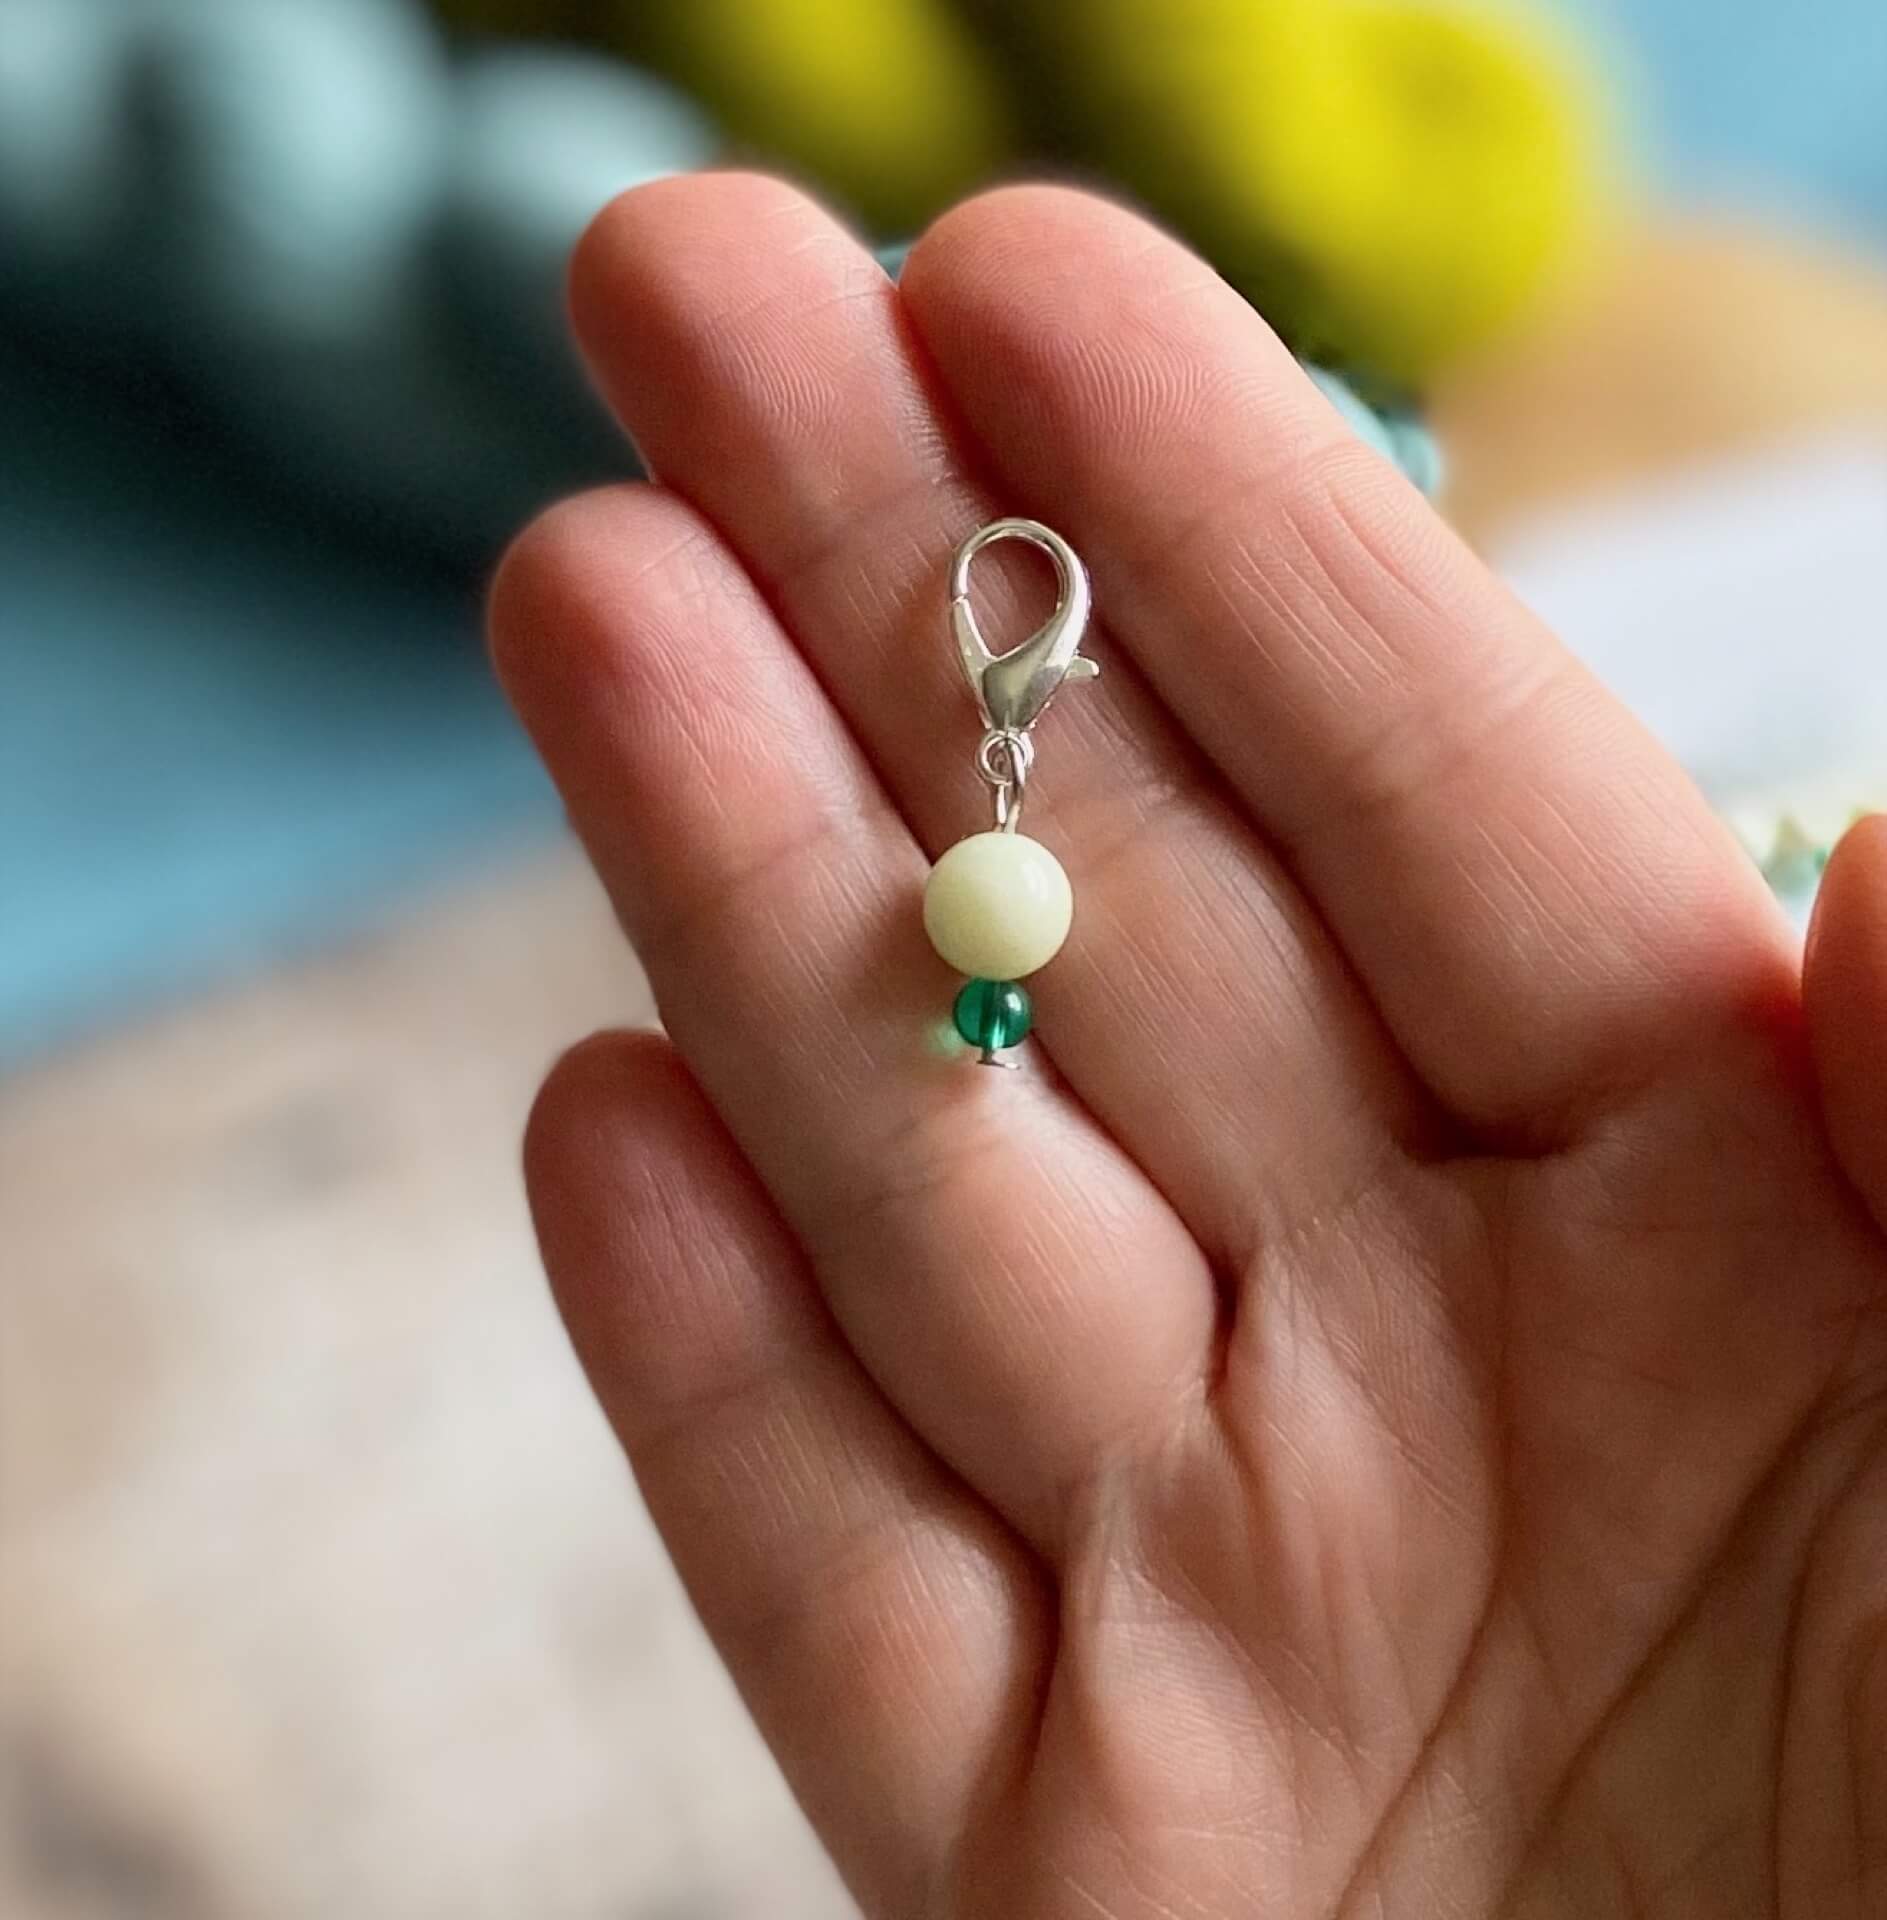 A progress keeper for knitting and crochet, designed to represent a snowdrop, is held on the fingers of the maker's hand. The progress keeper is made up of an ivory bead and a smaller green bead. 